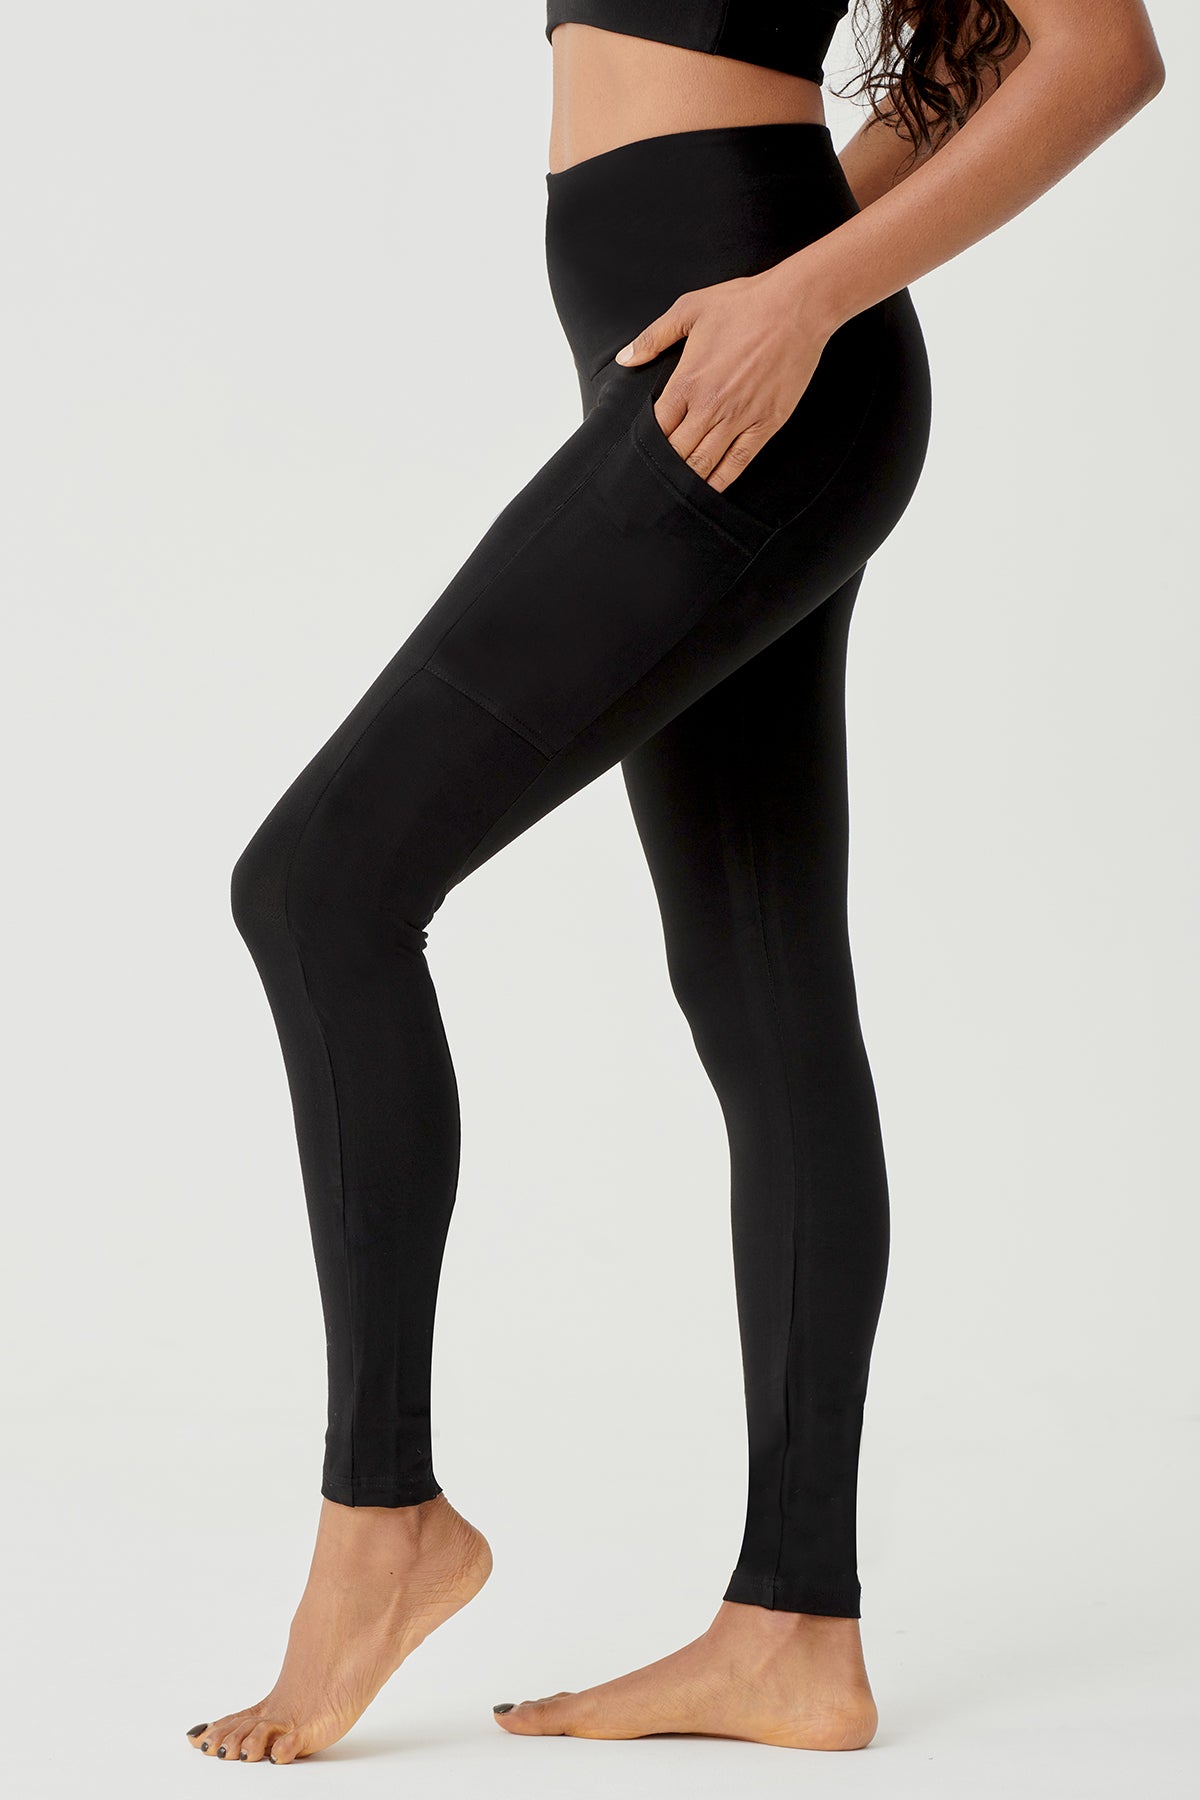 Second Skin Black Compression Crop Leggings Womens Athletic Pants Small